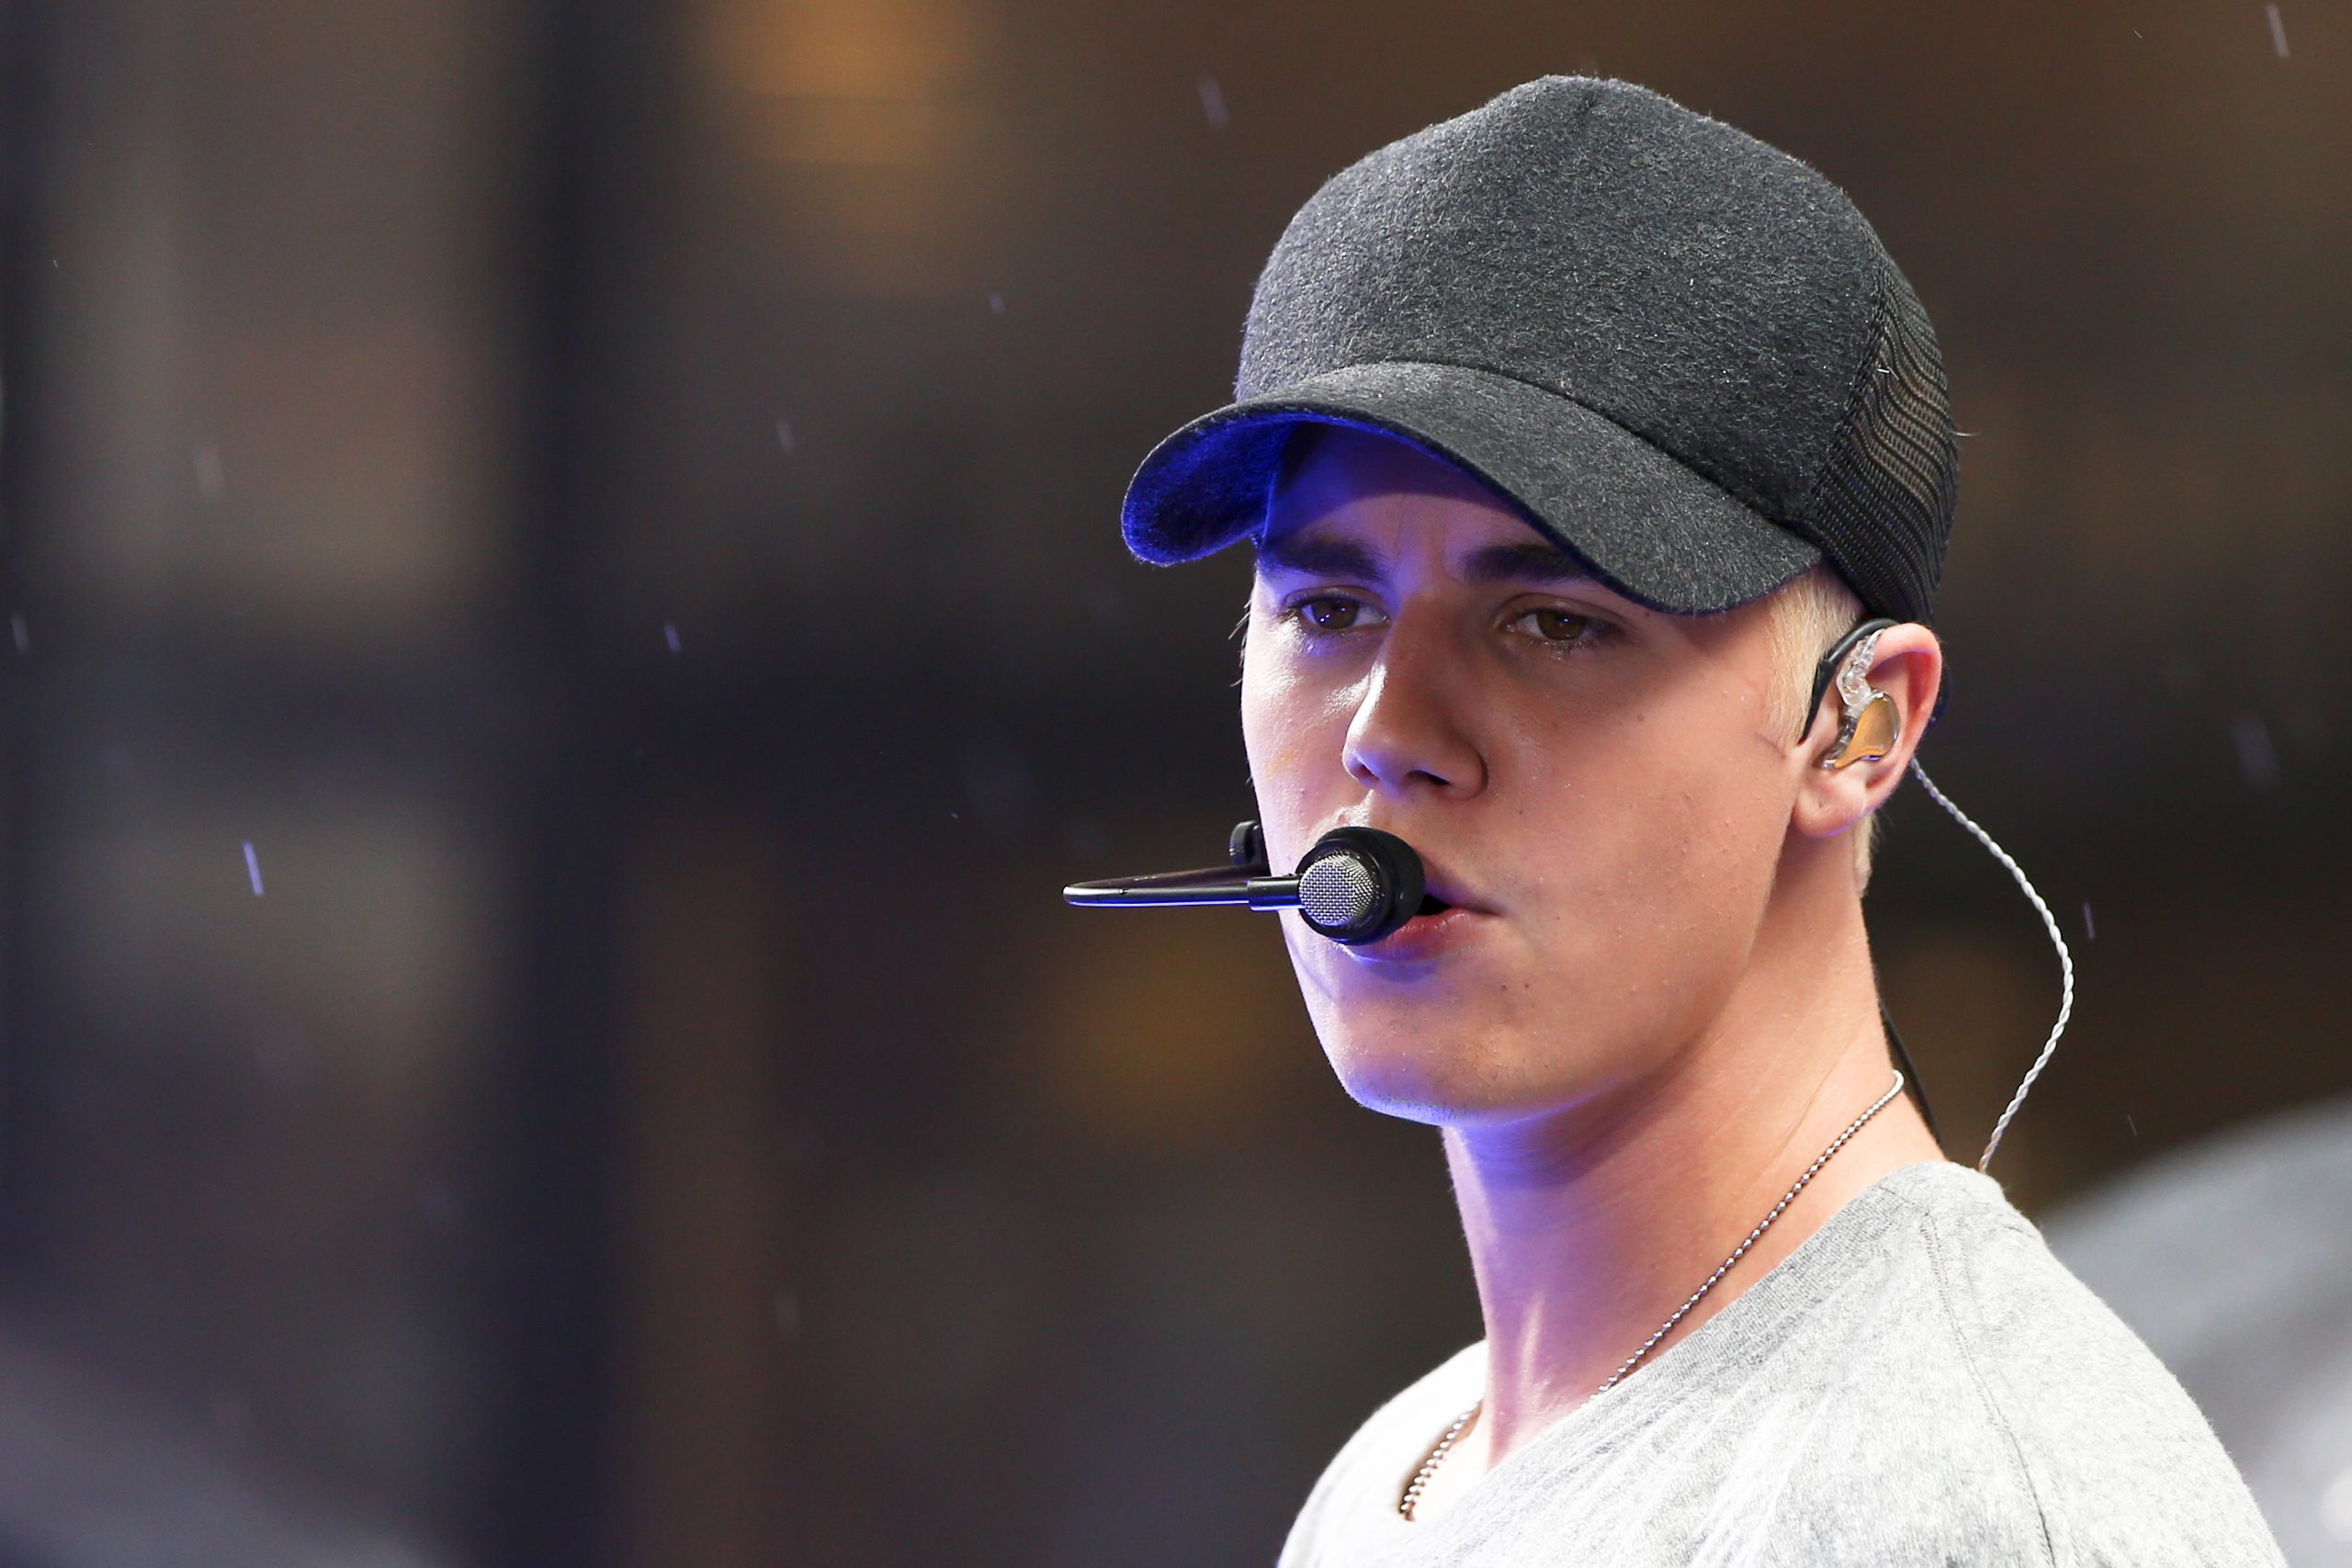 Justin Bieber to Tour Five Continents on the 'Justice World Tour'